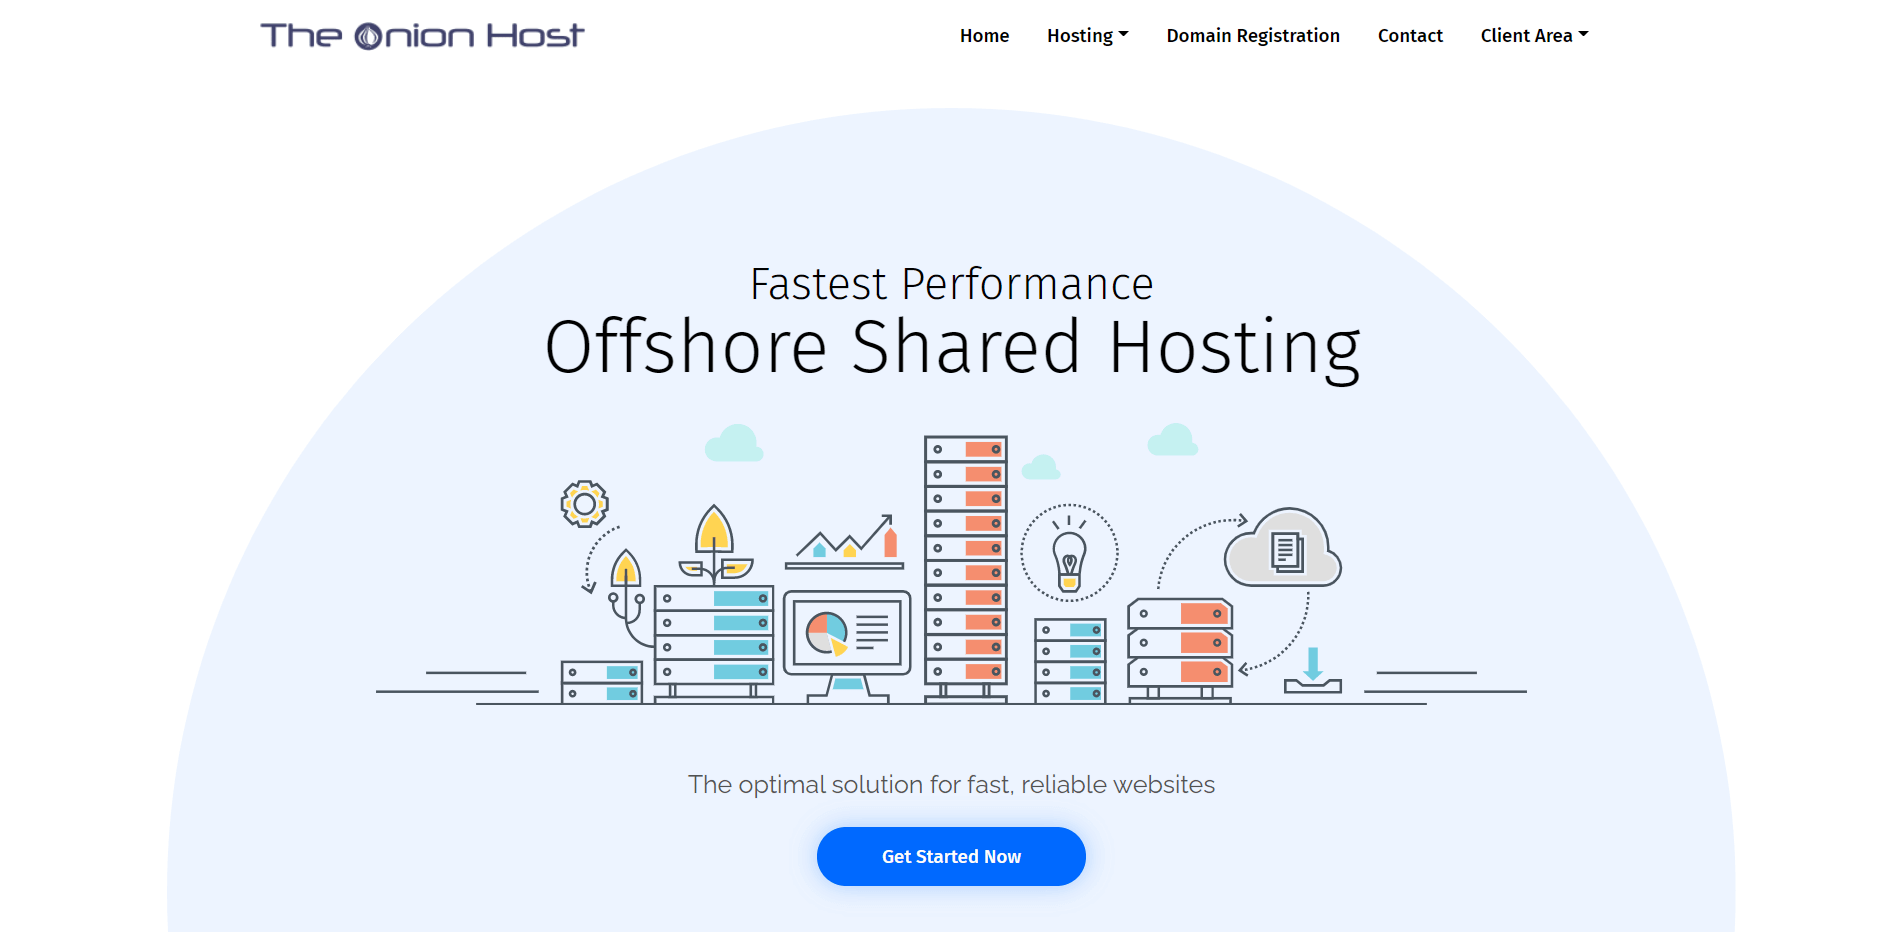 The offshore web hosting service, The Onion Host.